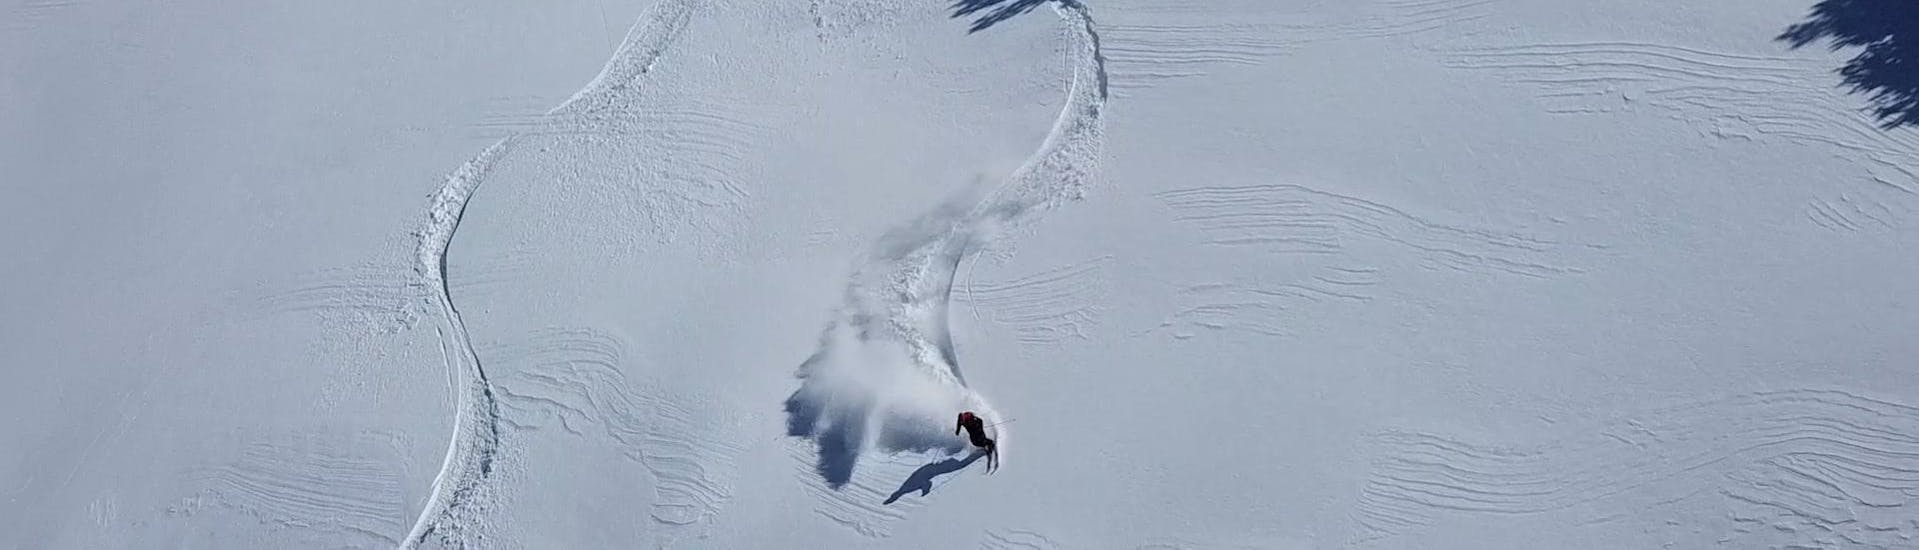 A skier enjoys the ride through the deep snow during the Private Off-Piste Skiing Lessons for all Levels of Escuela Ski Cerler.